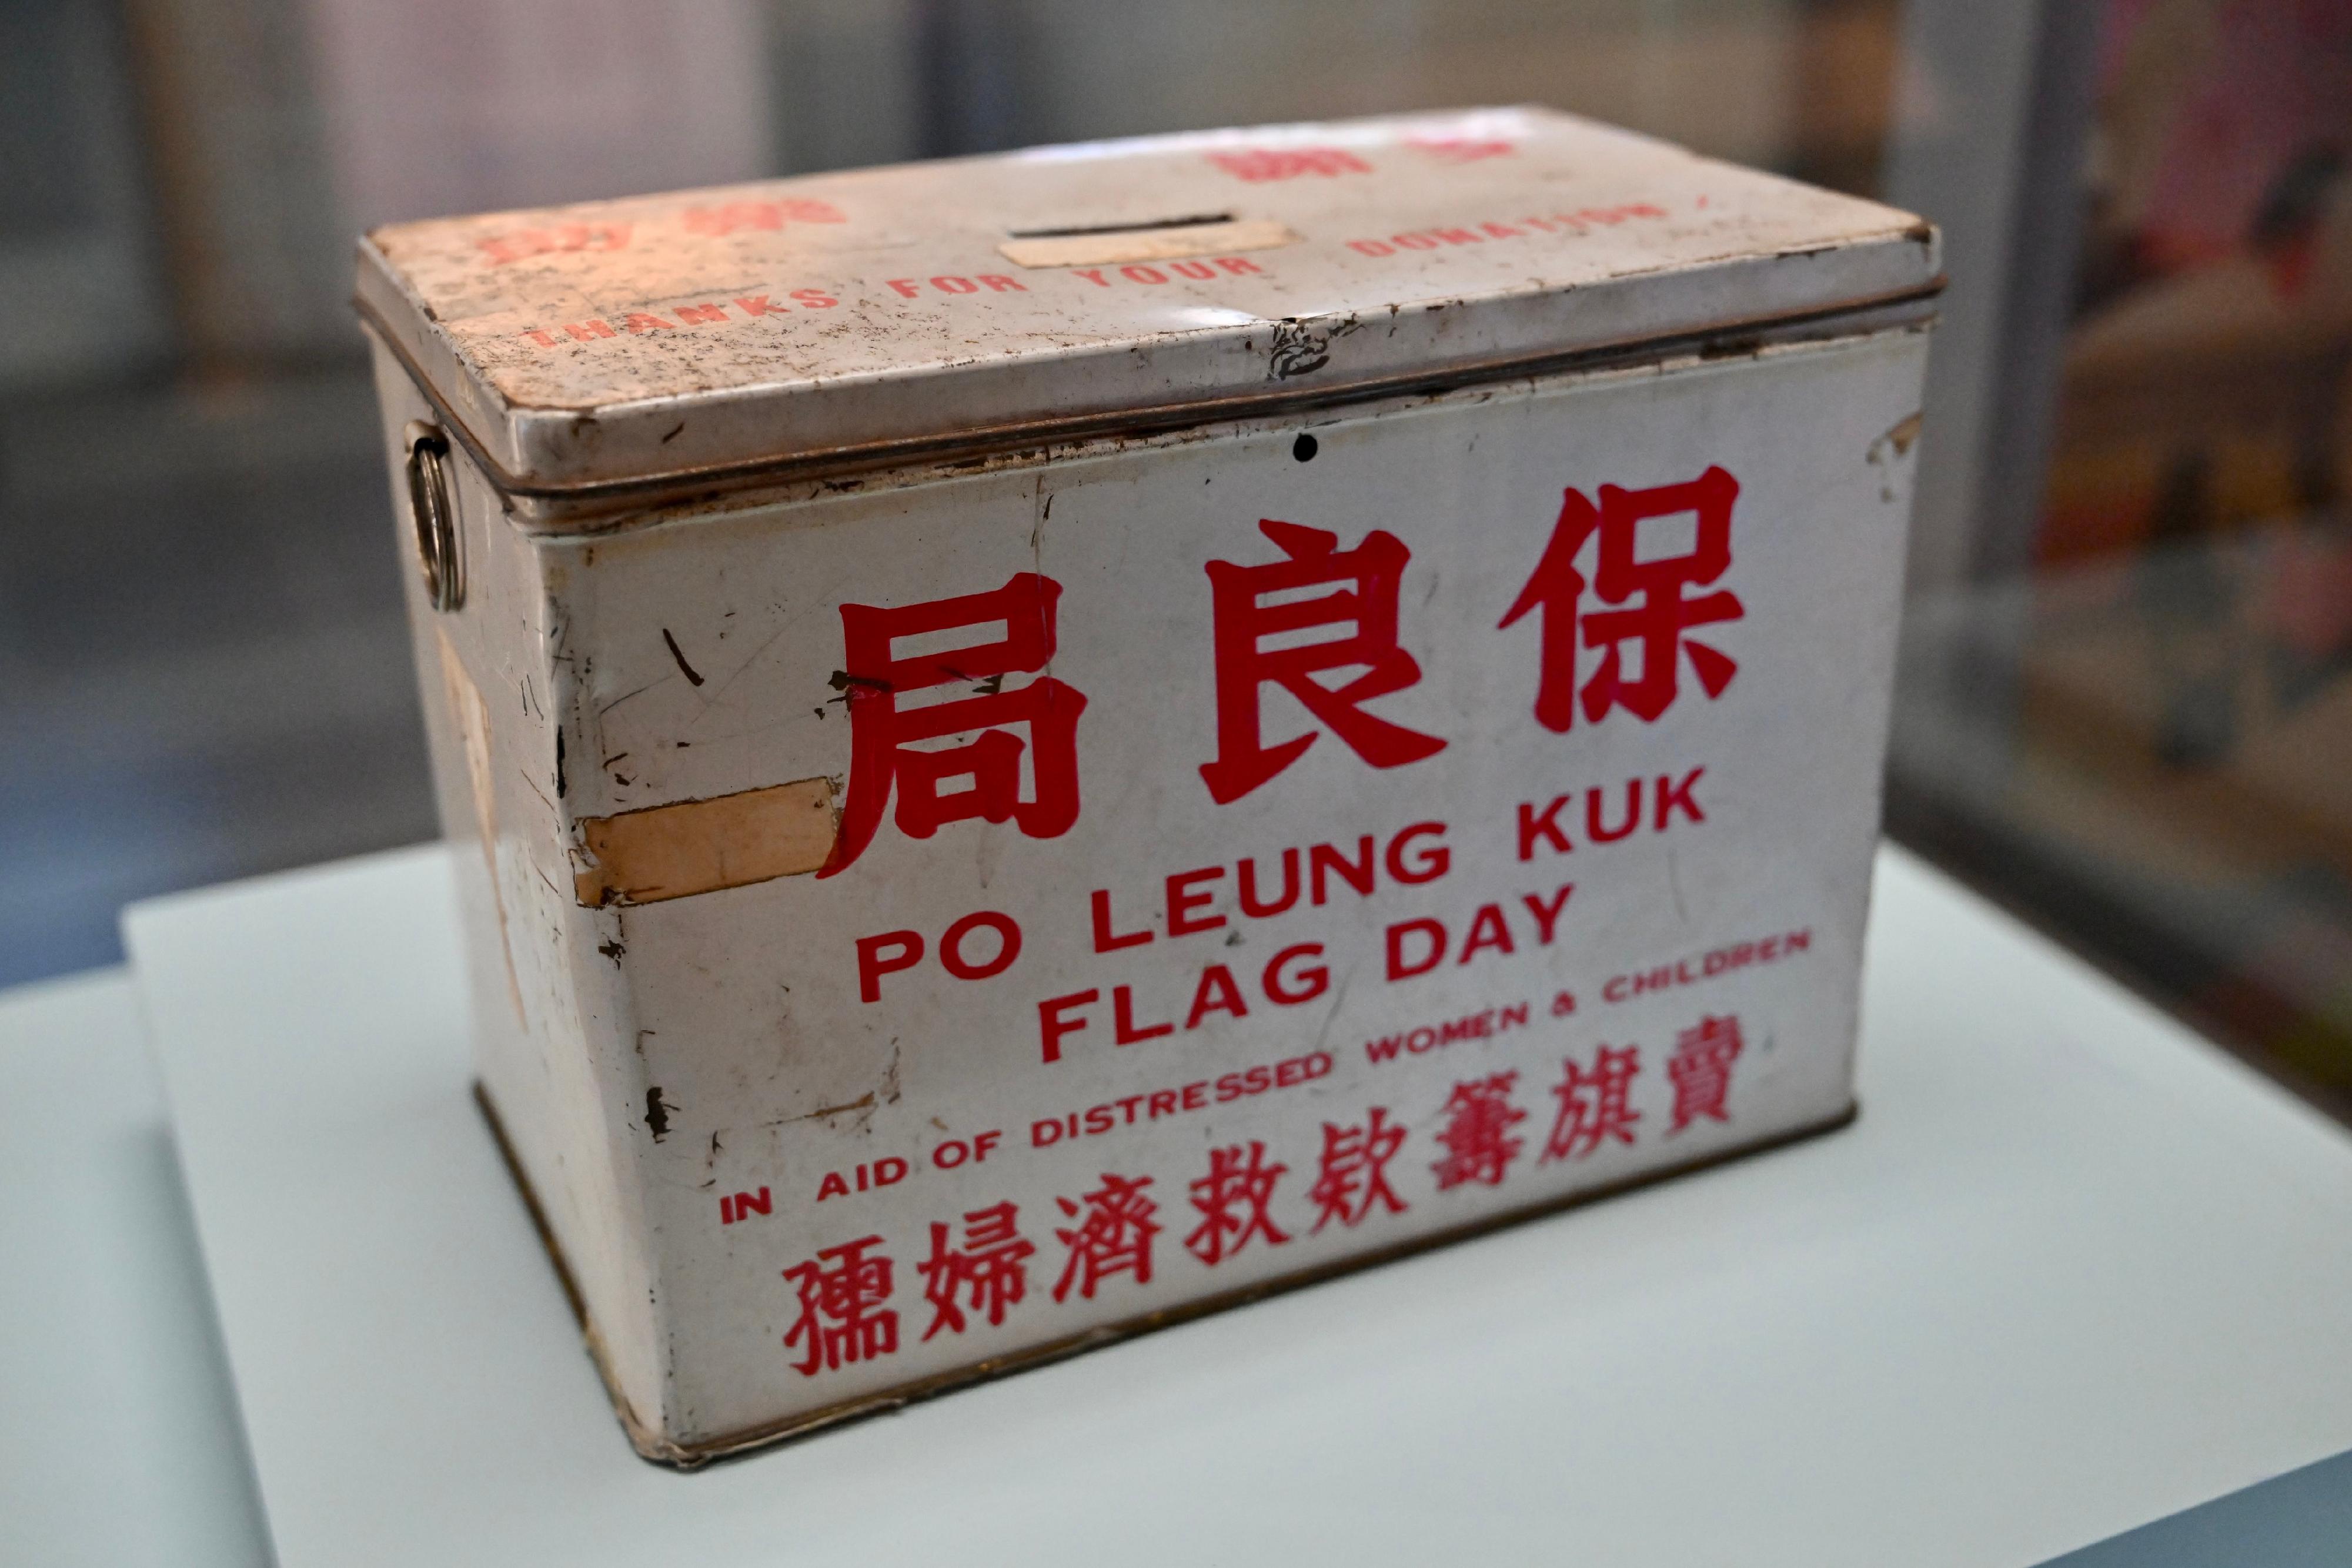 The opening ceremony for the exhibition "Po Leung Kuk 145th Anniversary: Building Charity with Benevolence" was held today (October 17) at the Hong Kong Heritage Museum. Photo shows a Po Leung Kuk Flag Day metal donation box.
